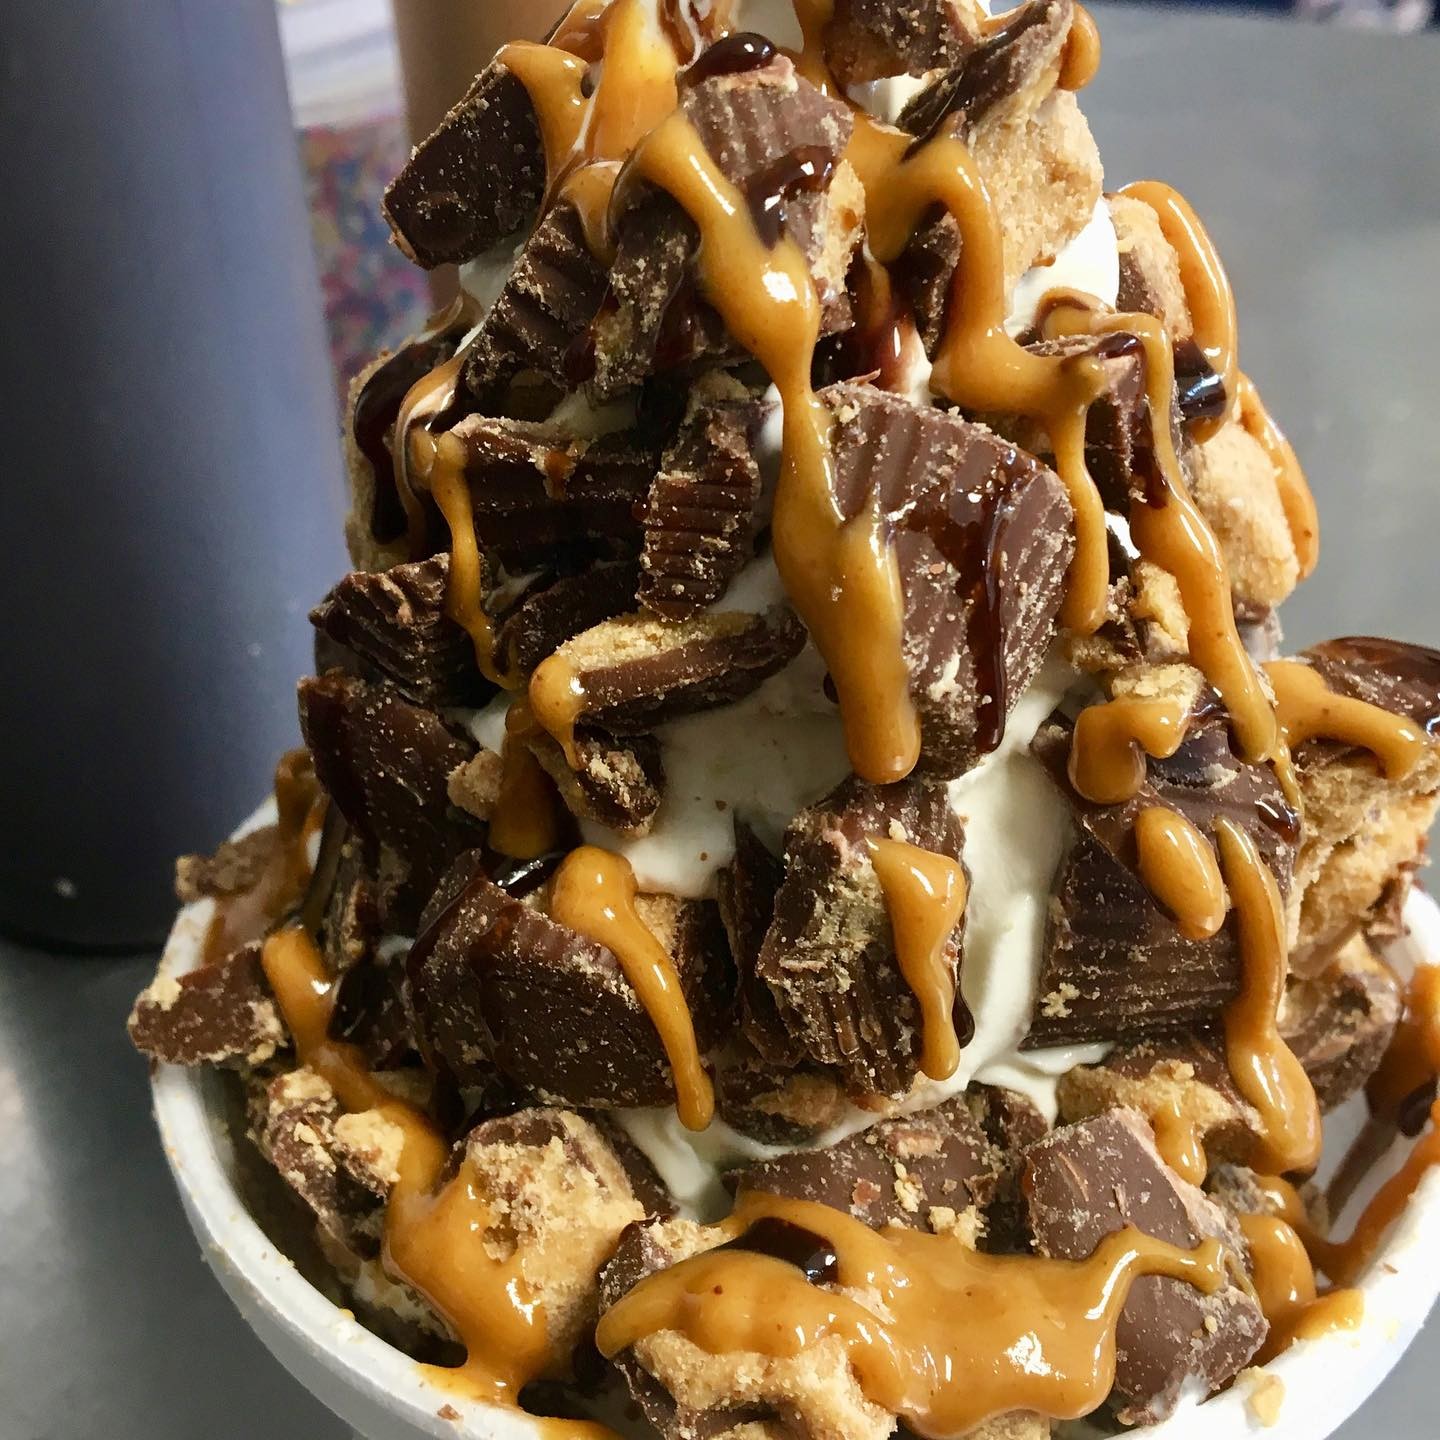 Reeses Peanut Butter Cup Sundae